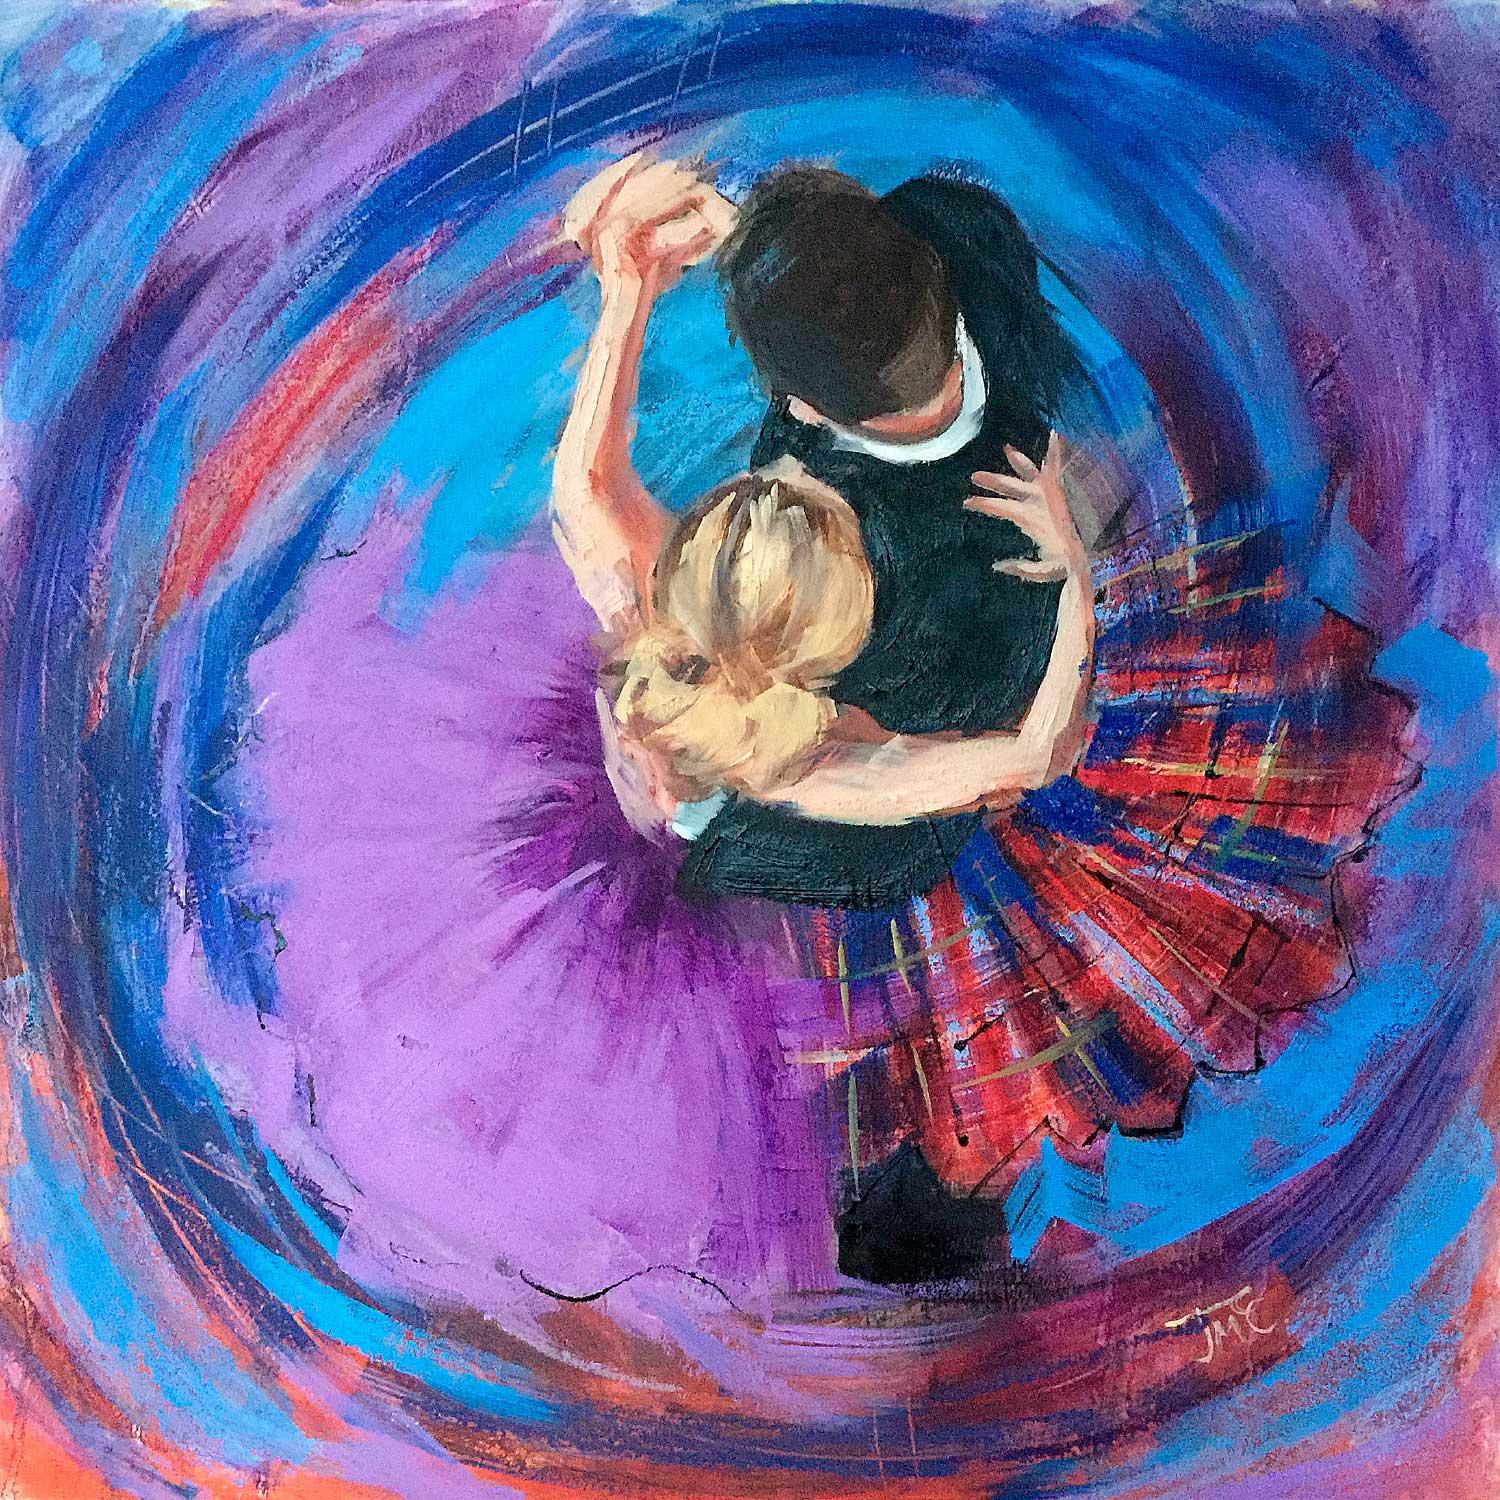 Above the Dance by Janet McCrorie